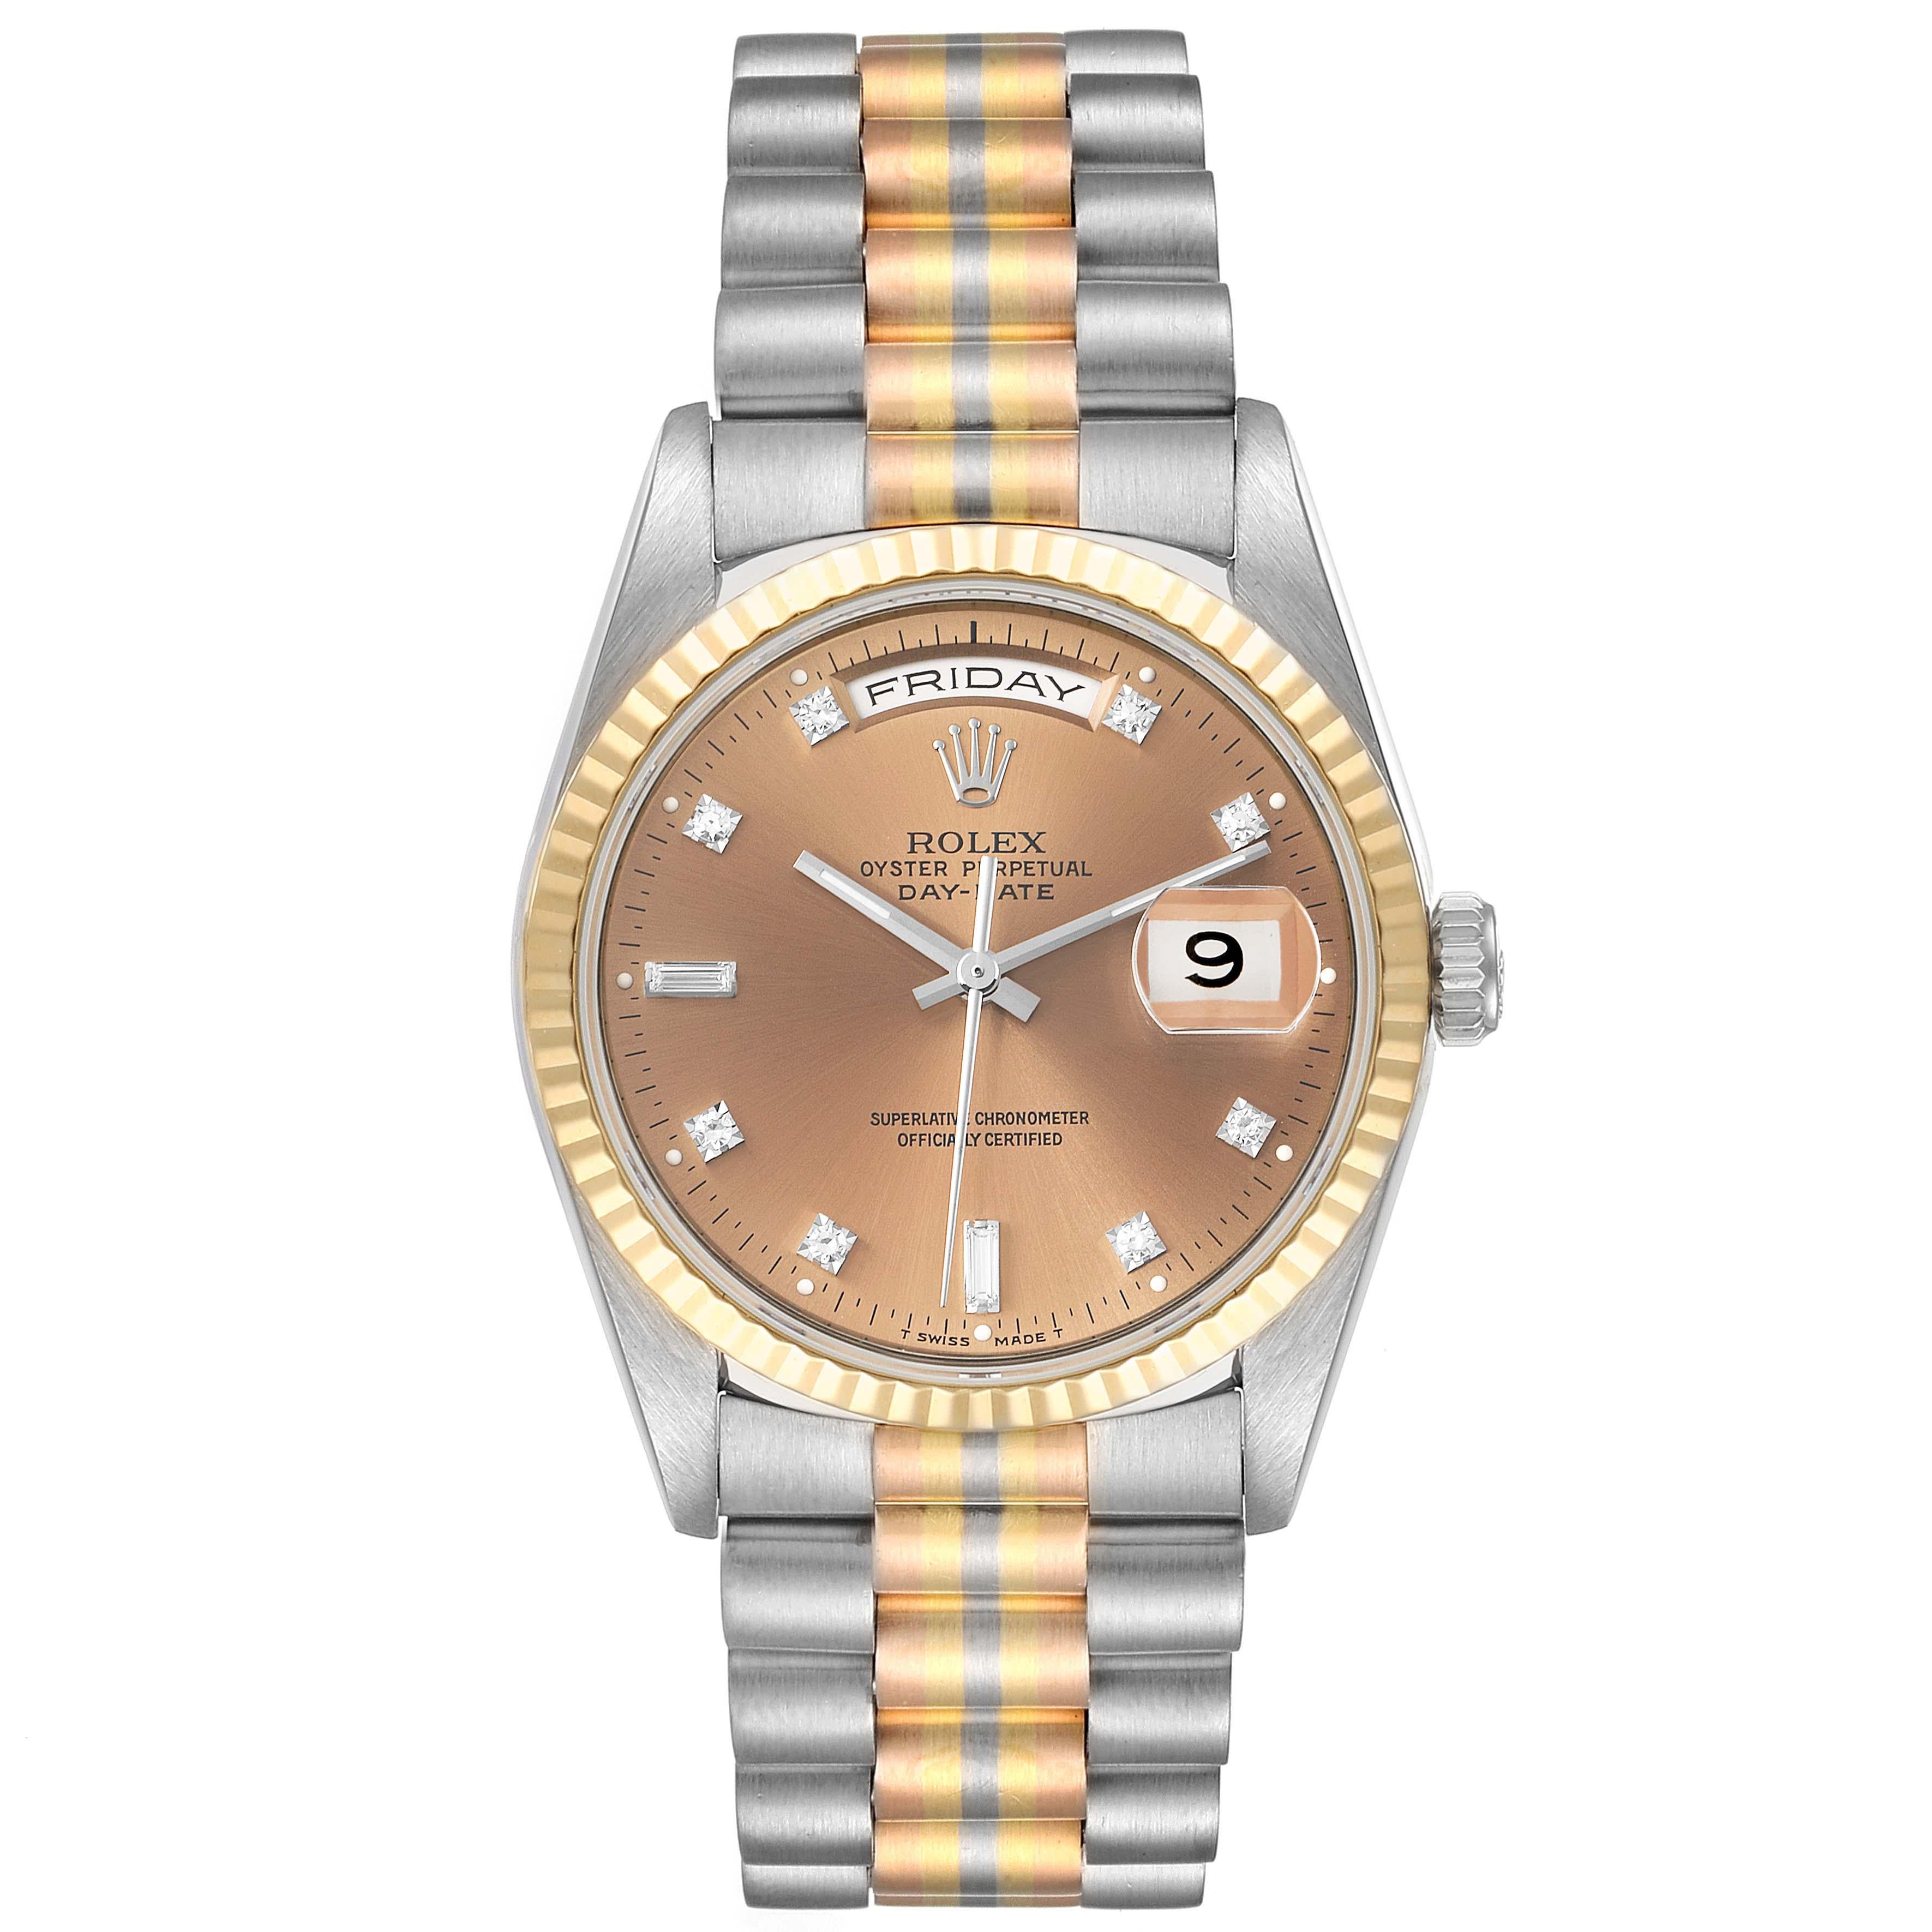 Rolex President Day-Date Tridor White Yellow Rose Gold Diamond Watch 18239. Officially certified chronometer self-winding movement with quickset date function. 18k white gold oyster case 36.0 mm in diameter. Rolex logo on a crown. 18k yellow gold